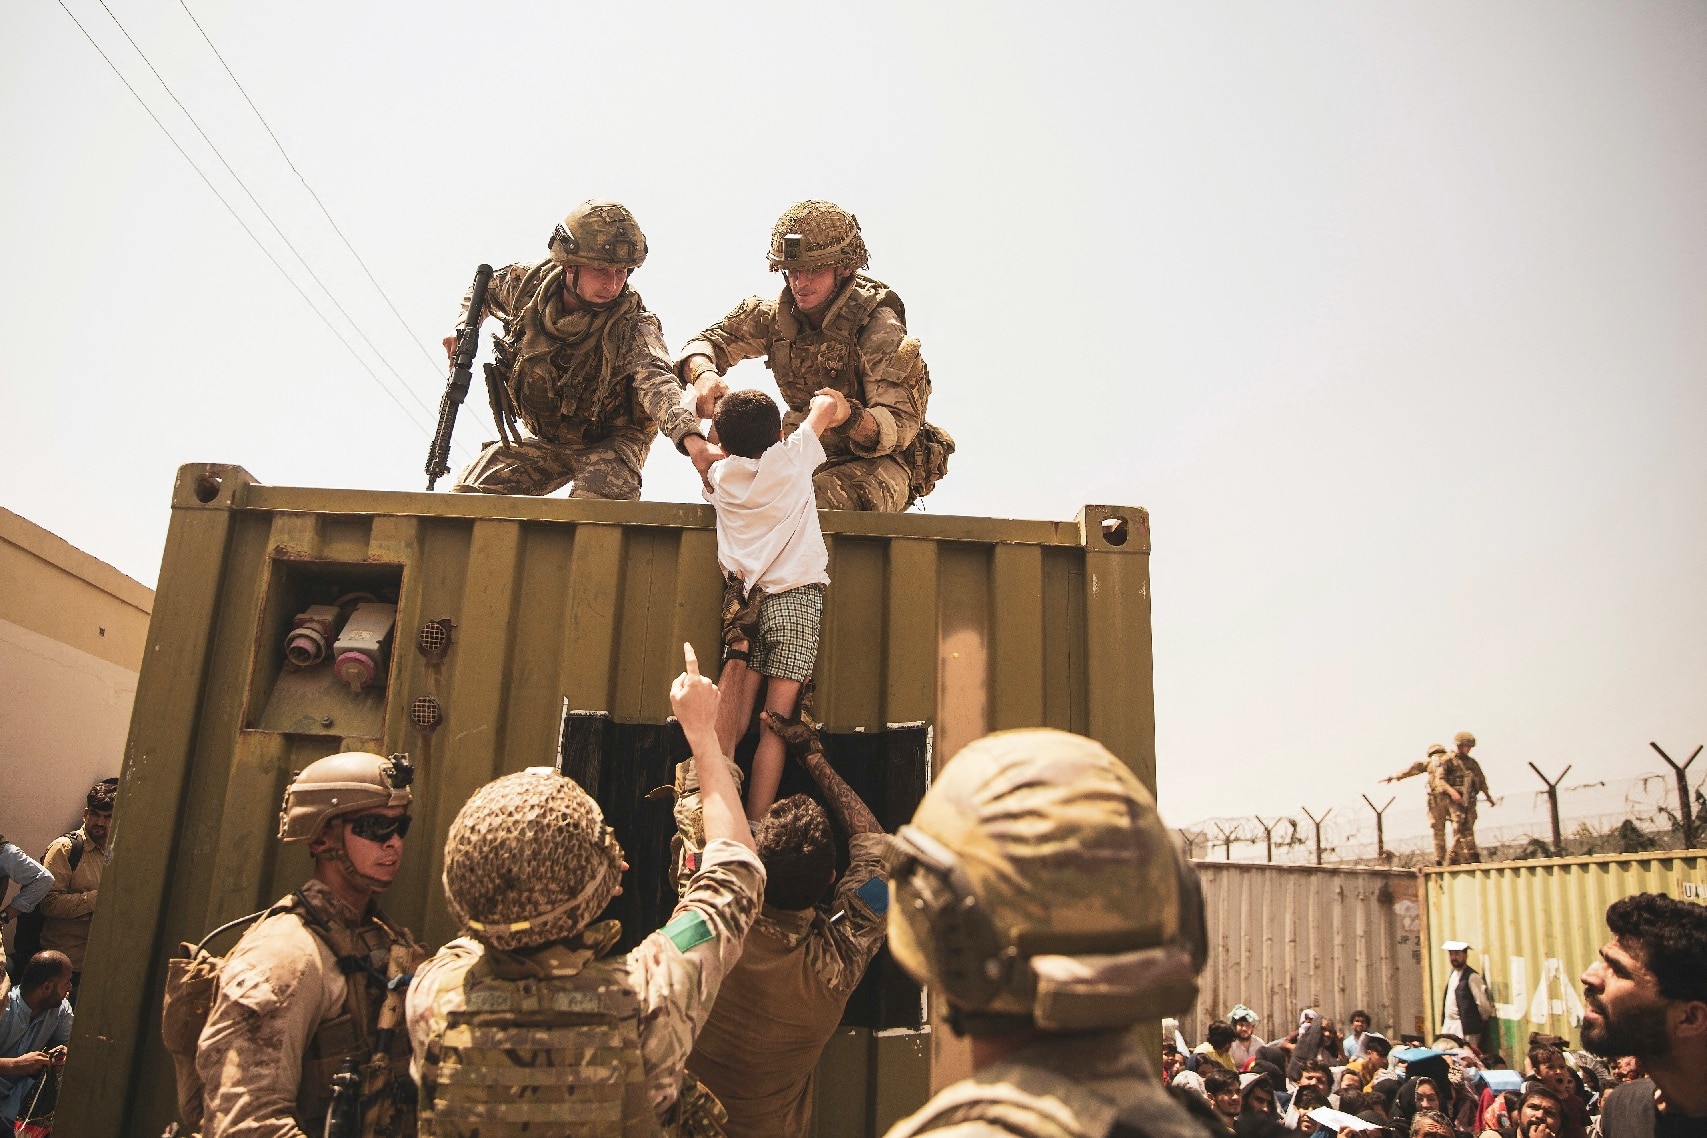 UK coalition forces, Turkish coalition forces, and US Marines assist a child during an evacuation at Hamid Karzai International Airport on 20 August 2021.